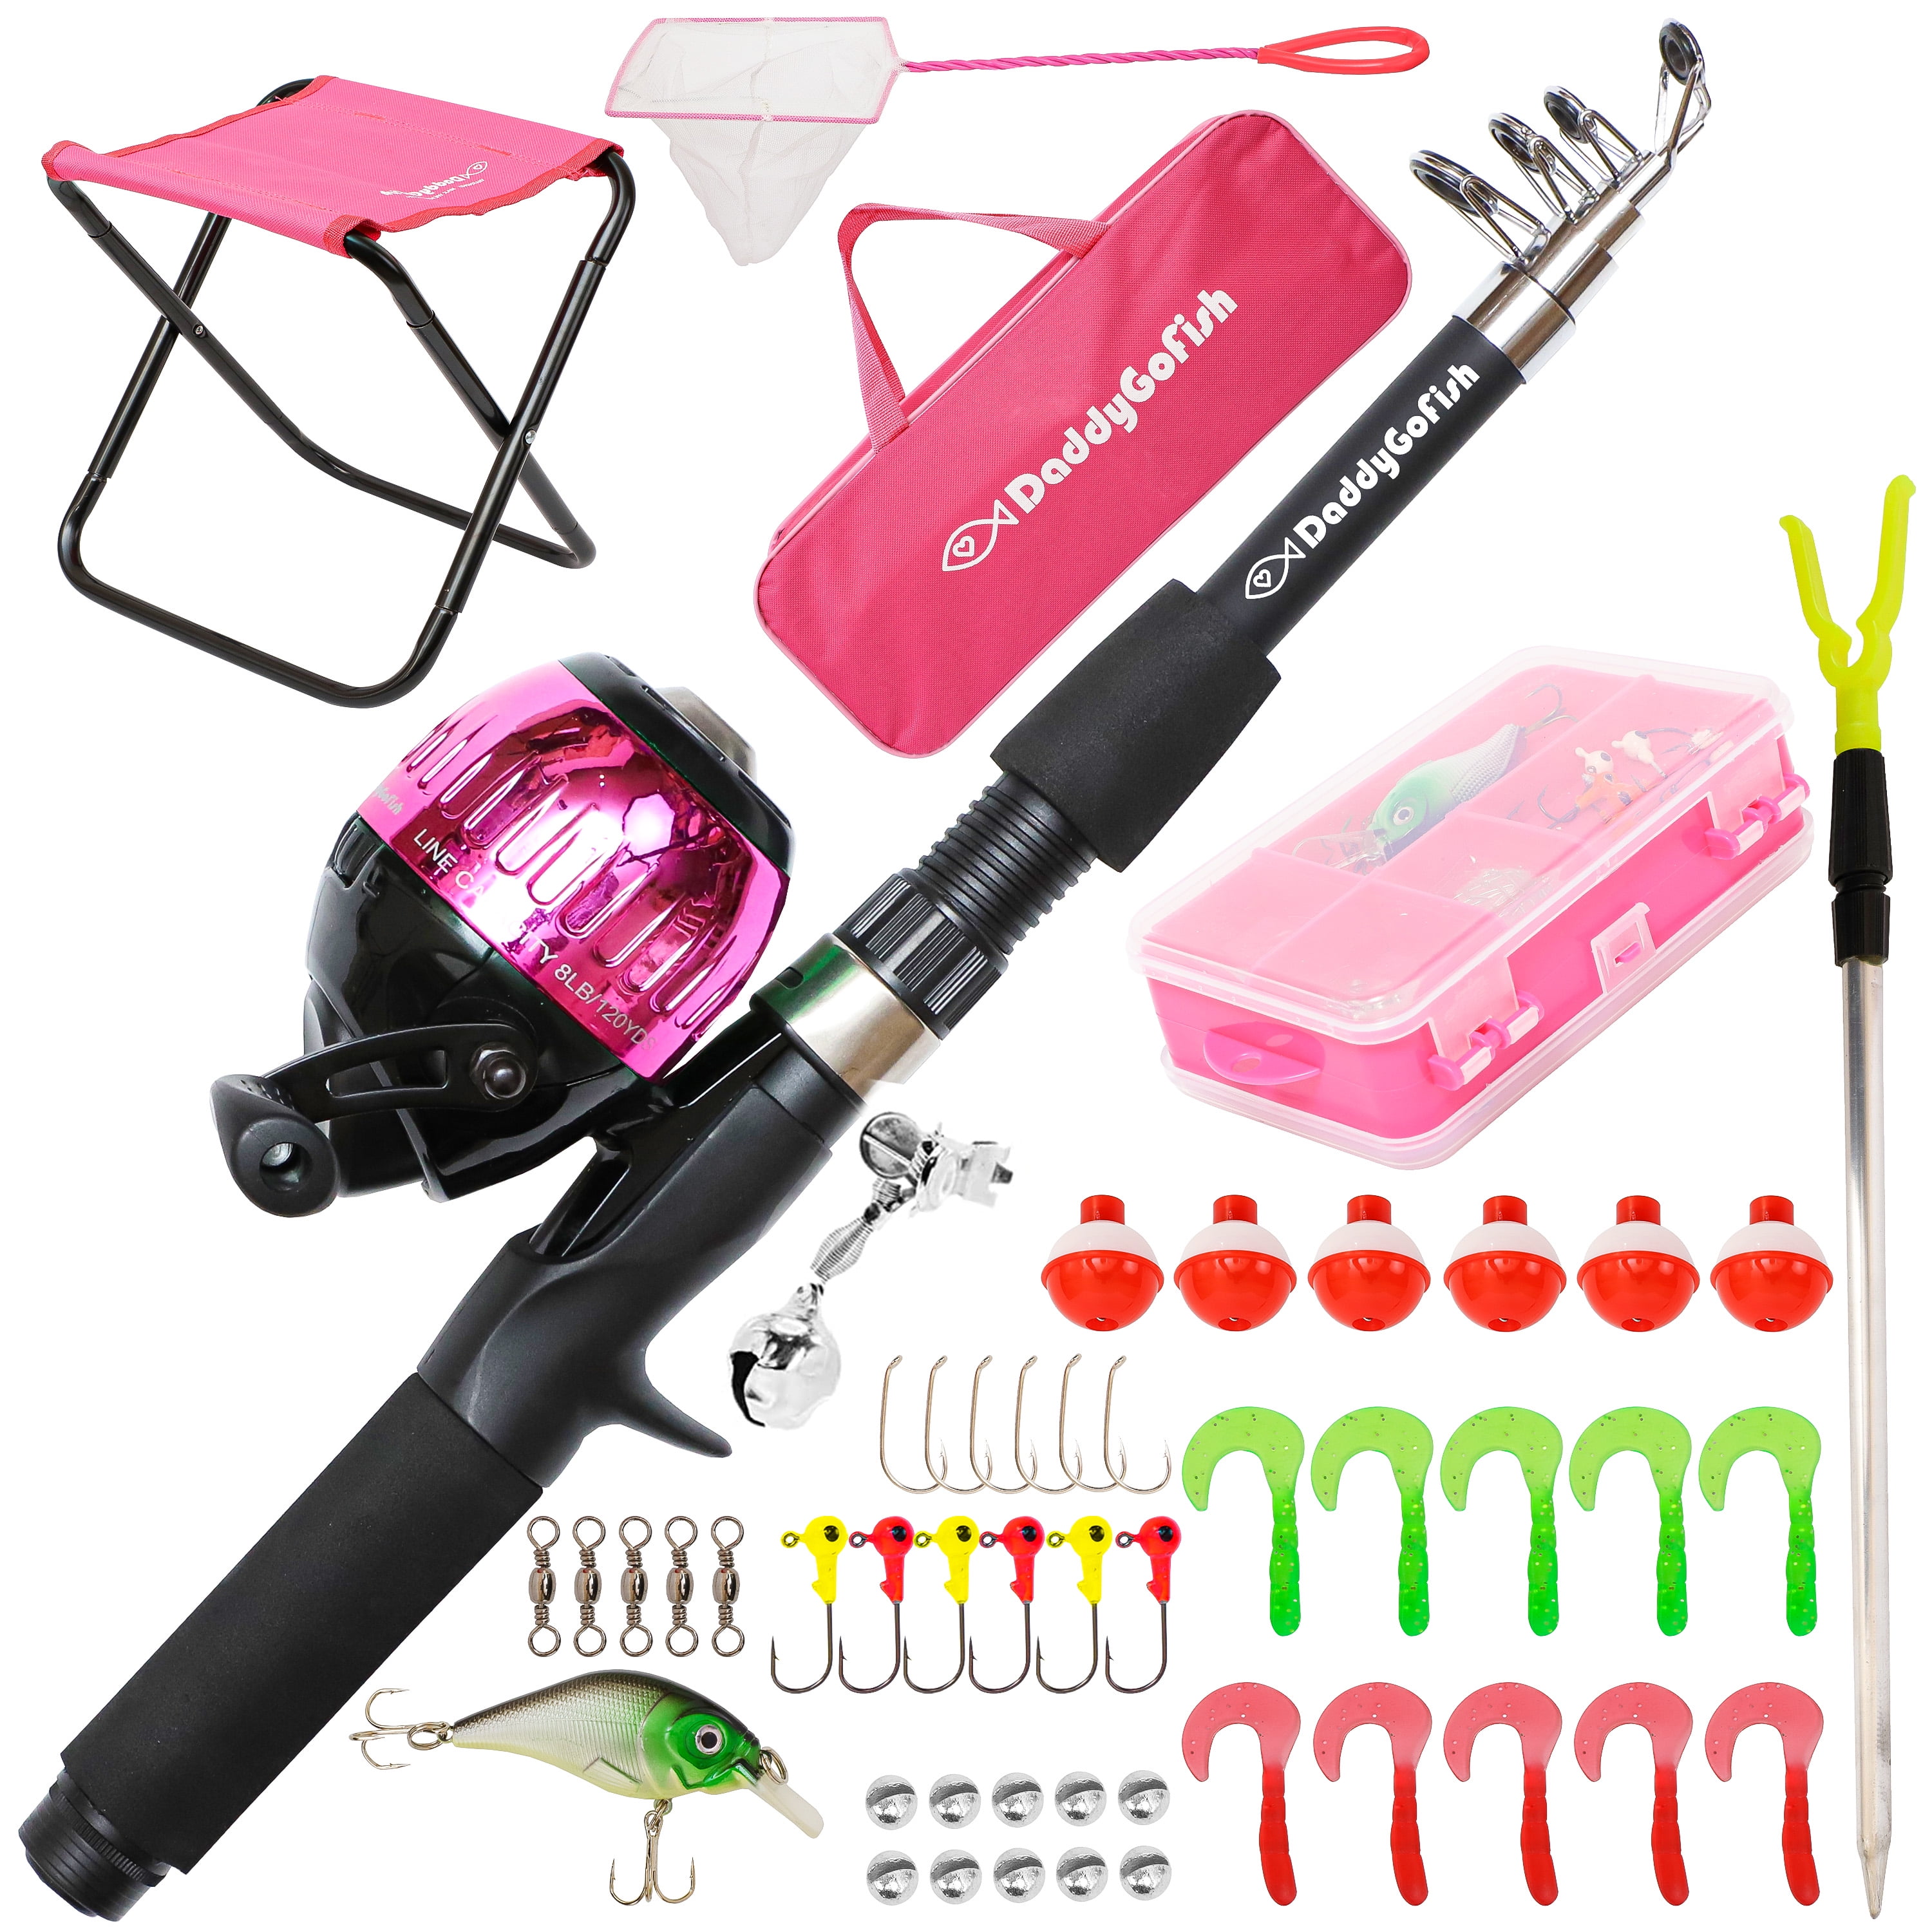 Edtara Kids Fishing Pole Telescopic Rod Reel Combo With Carry Bag Fishing Accessories For Youth Girls Boys Other